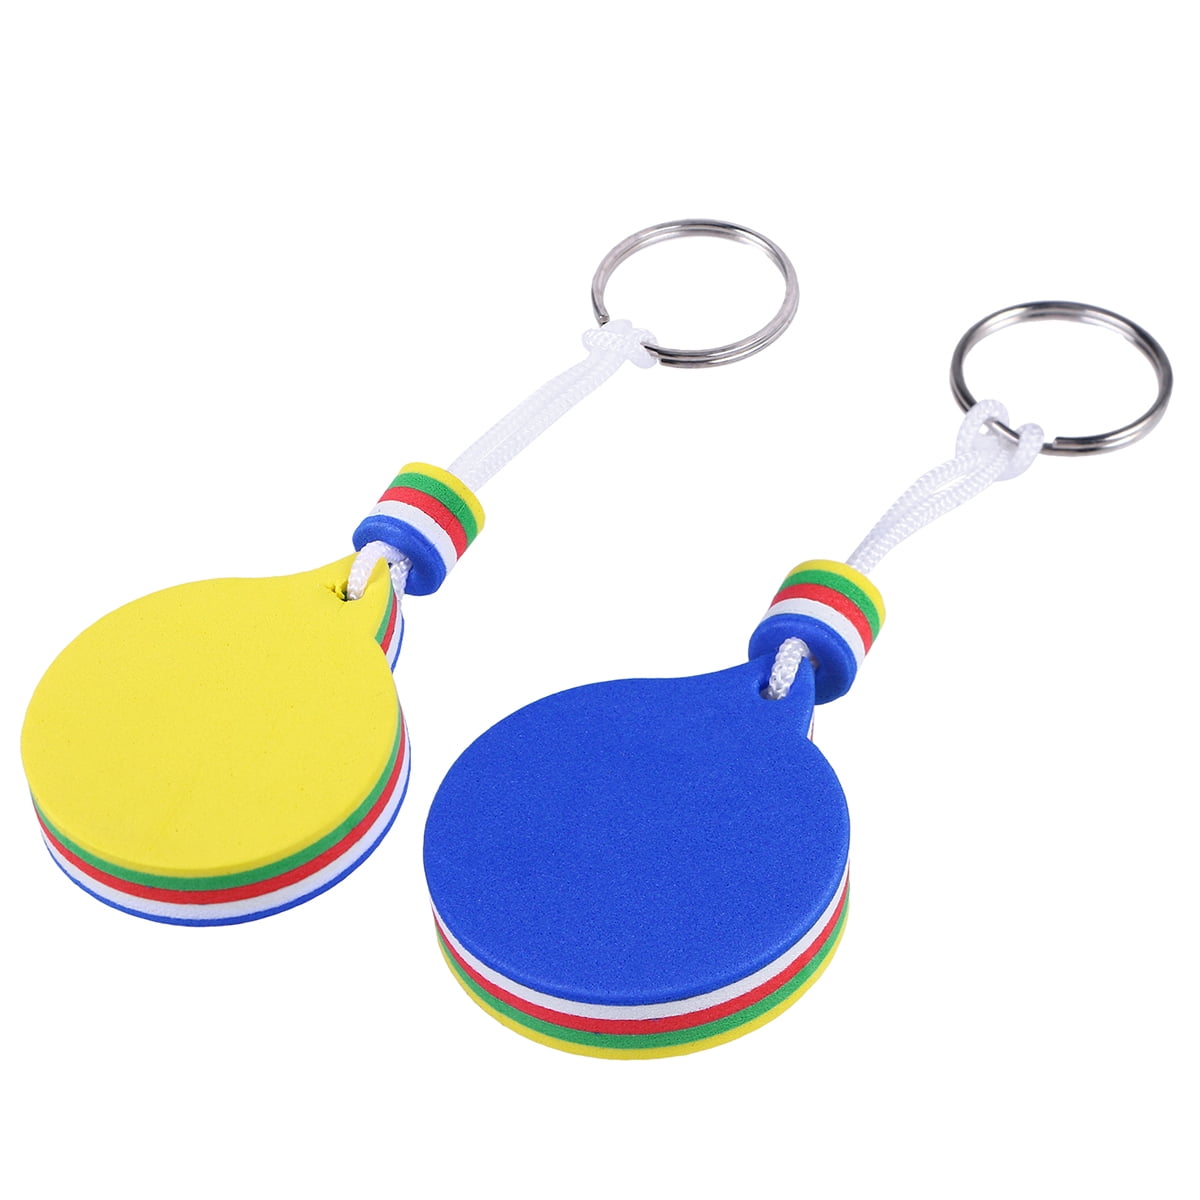 Details about   4   Pieces   Foam   Floating   Key   Chain   Float   Keychain   for   Boating 